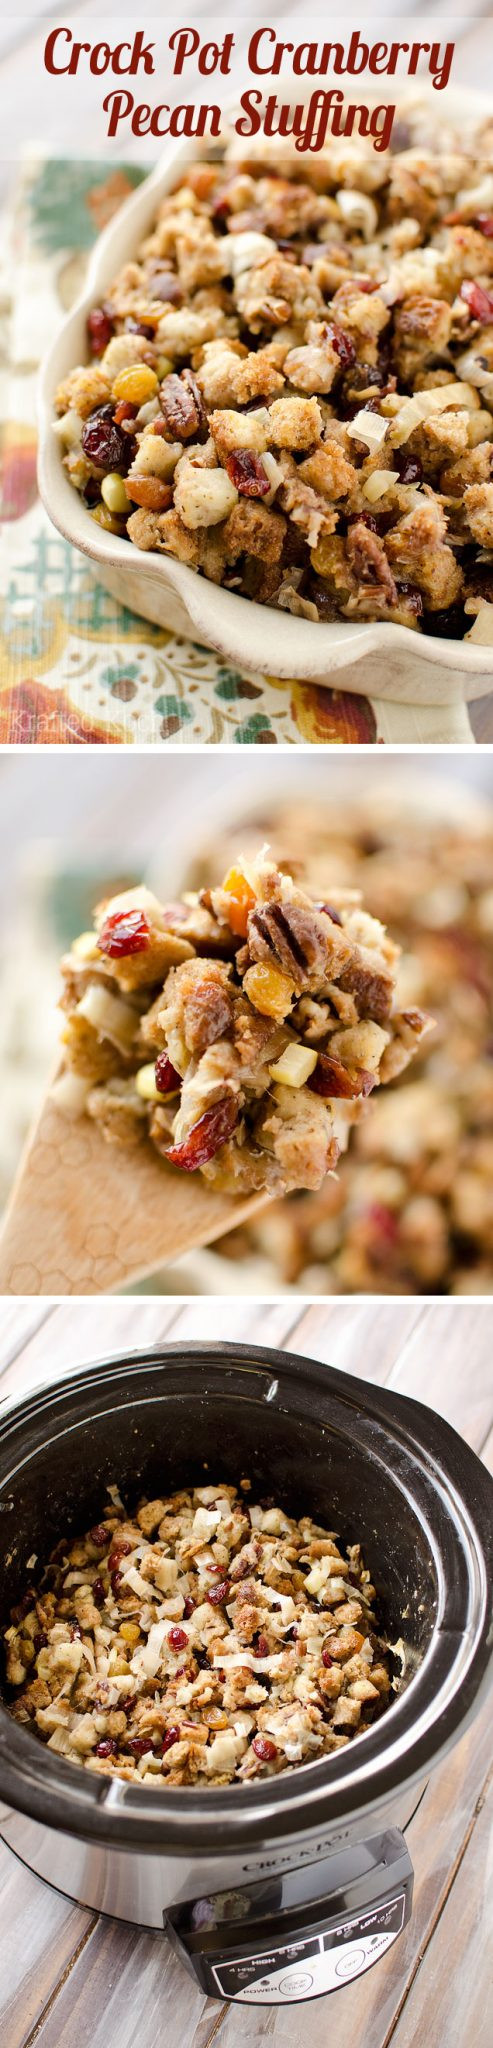 Crockpot Side Dishes For Thanksgiving
 Crock Pot Cranberry Pecan Stuffing